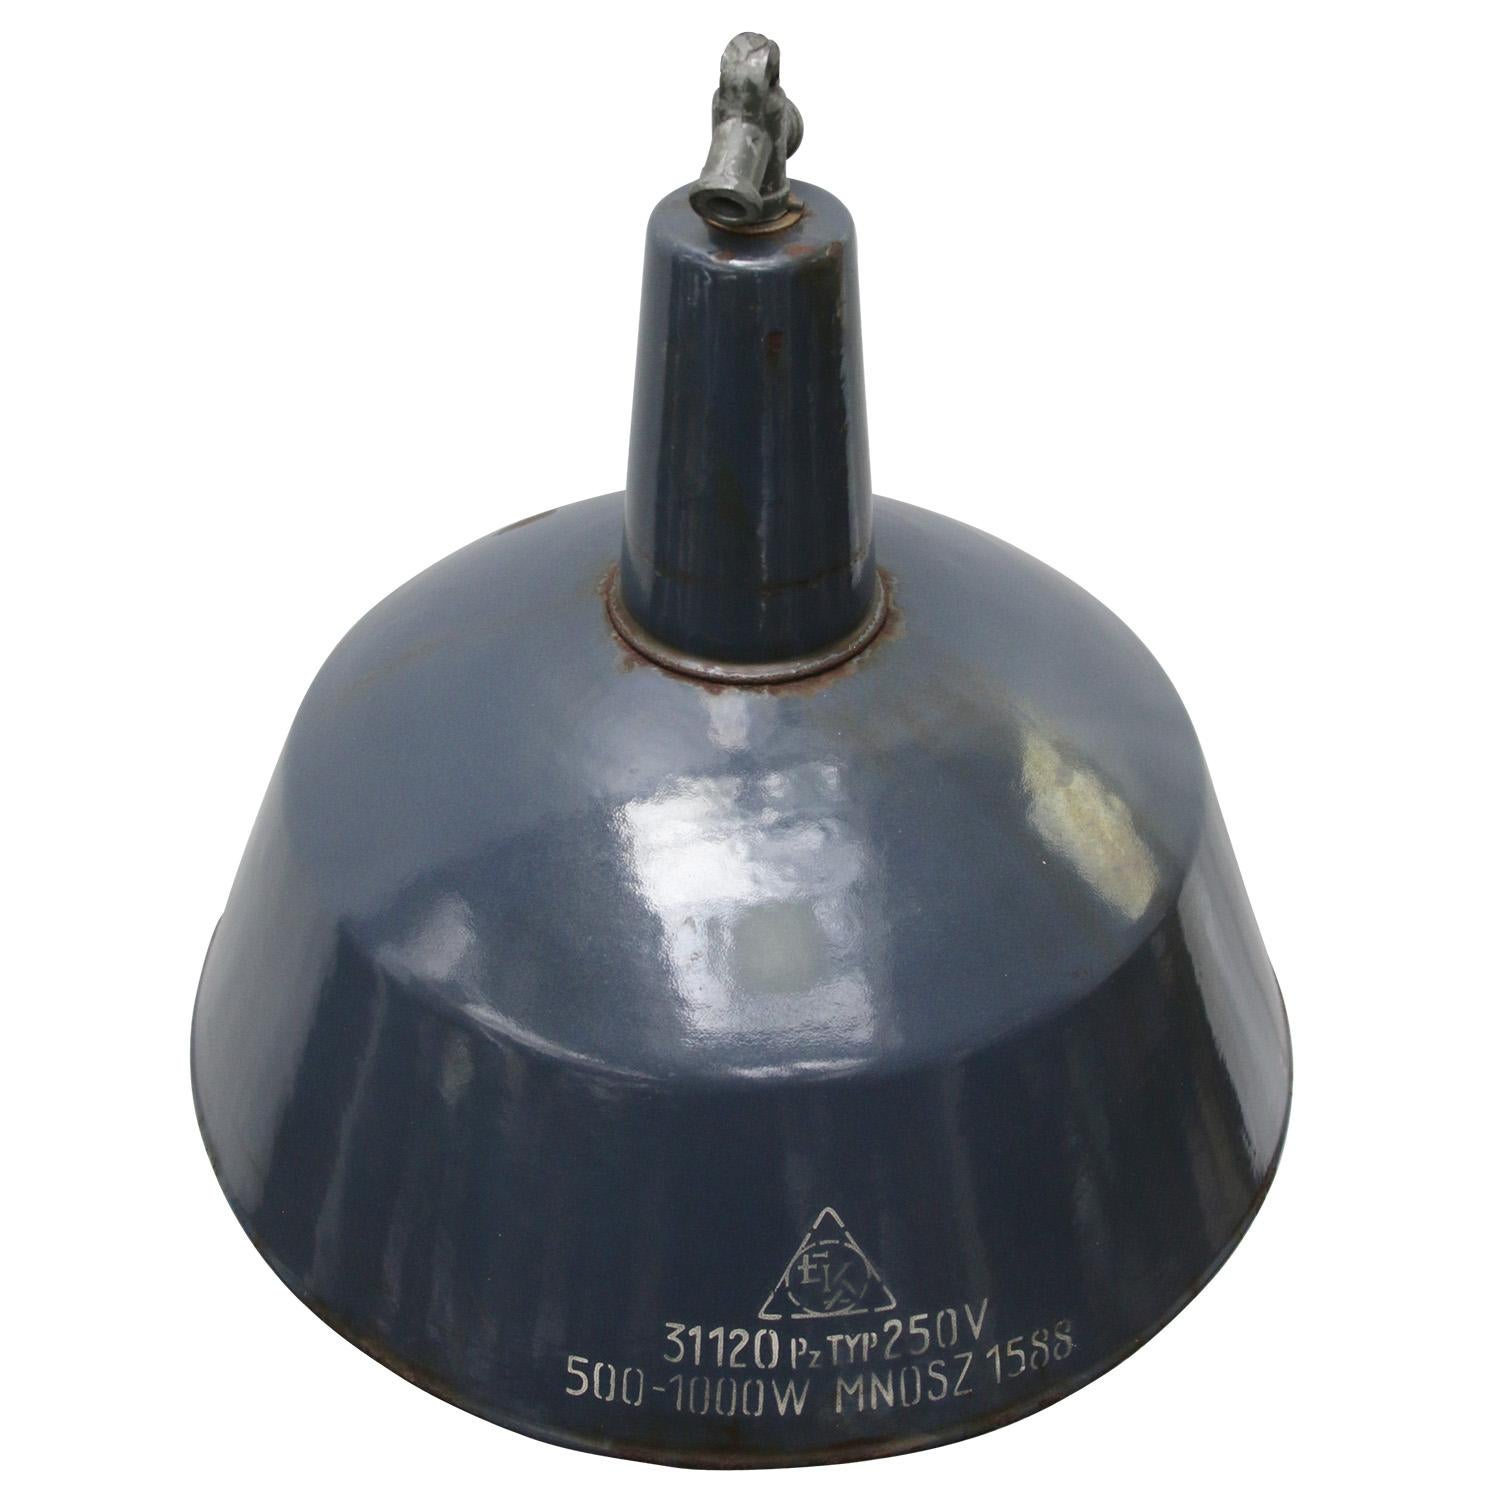 Factory hanging light
Very dark blue enamel, white interior

Measures: weight: 3.00 kg / 6.6 lb

Priced per individual item. All lamps have been made suitable by international standards for incandescent light bulbs, energy-efficient and LED bulbs.